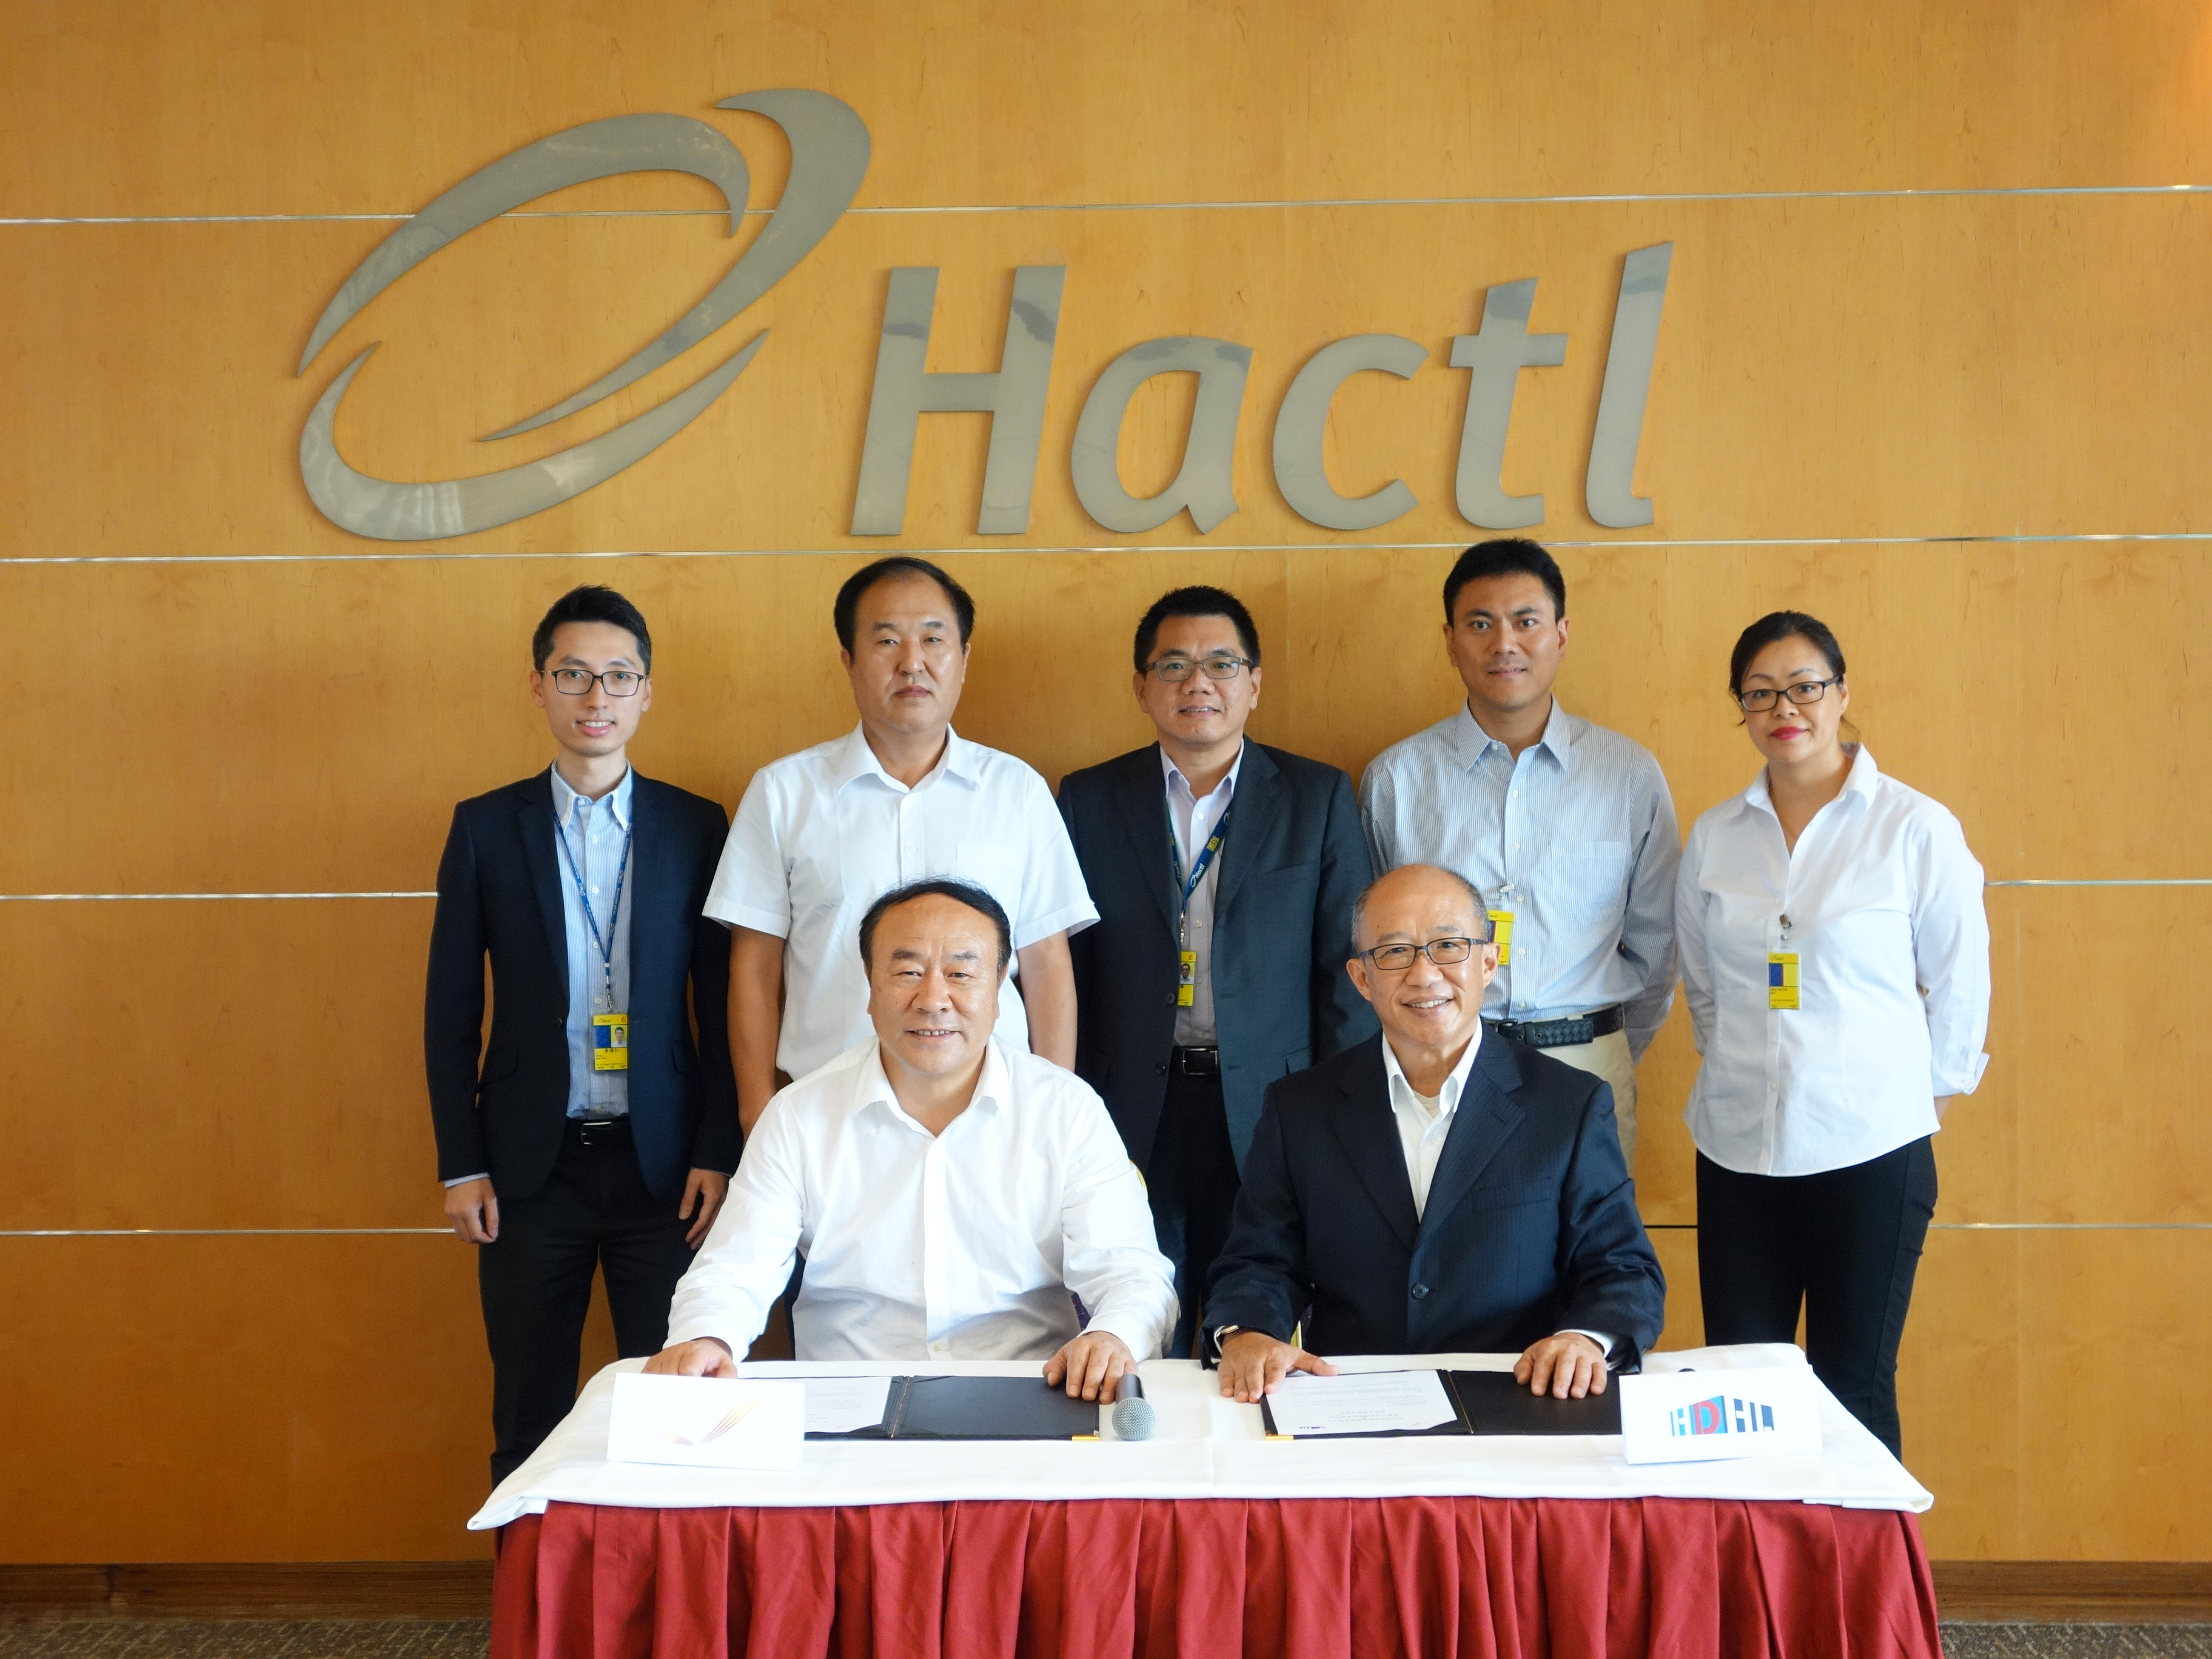 HDHL MD Tony Cho (front right) signs the Strategic Cooperation Framework Agreement with Liaoning Airport Management Group Co., Ltd. Chairman Wang De Jia (front left), observed by representatives of both companies: (rear L to R) HDHL Assistant Division Manager – Project Development Vincent Mak; Shenyang Taoxian International Airport Co. Ltd Deputy General Manager Shen Hengde; Hactl Chief Operating Officer Tan Chee Hong; Liaoning Airport Management Group Co., Ltd Office Director Xie Hongwei; and Aviation Affairs Marketing Committee Vice General Manager Pan Xiaoran.